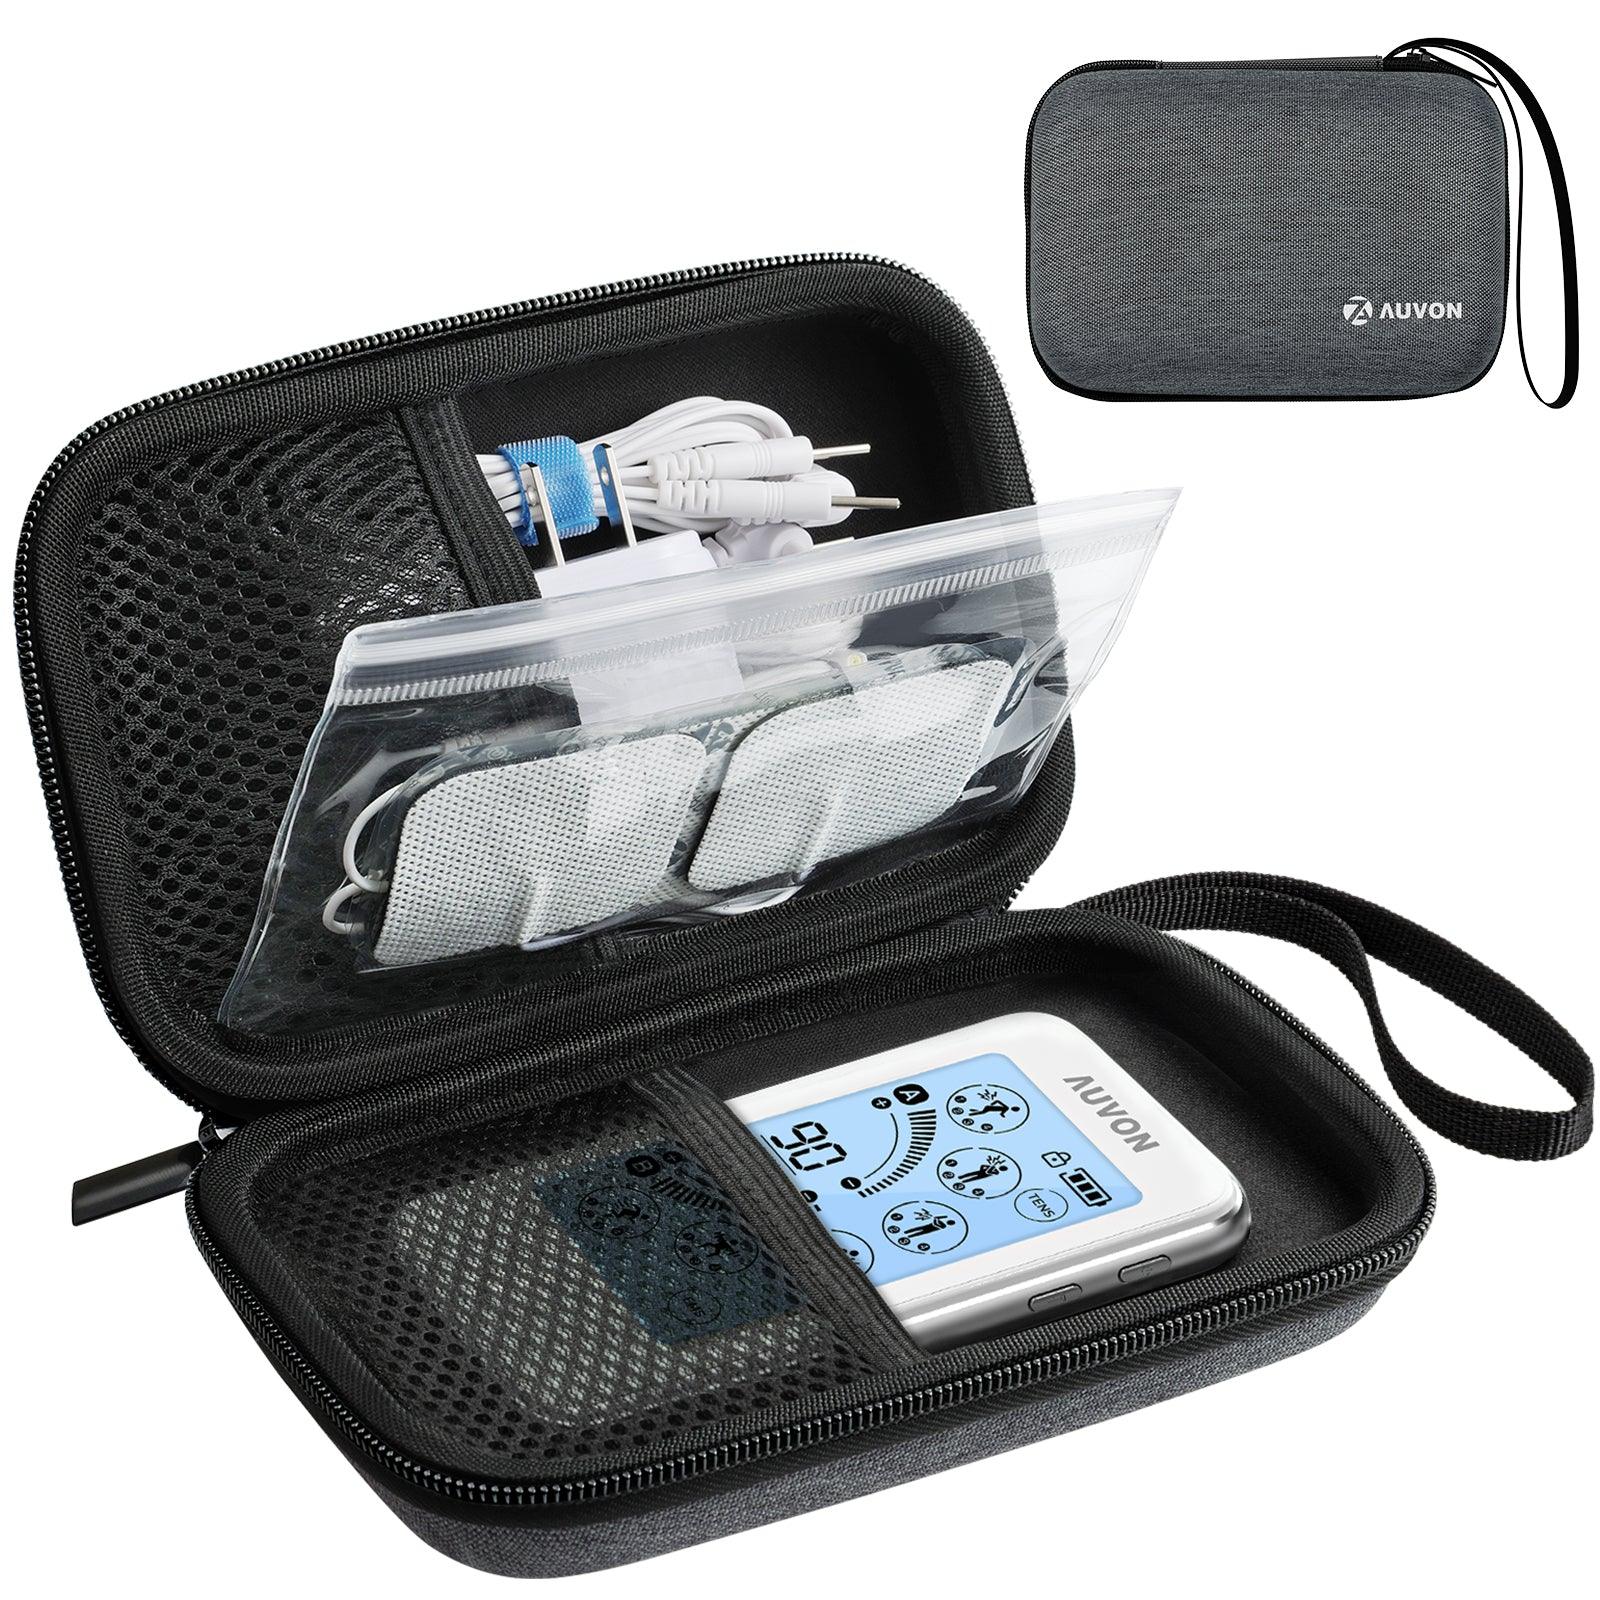 AUVON Professional Hard EVA Travel Case with a Sealed Bag for TENS Uni